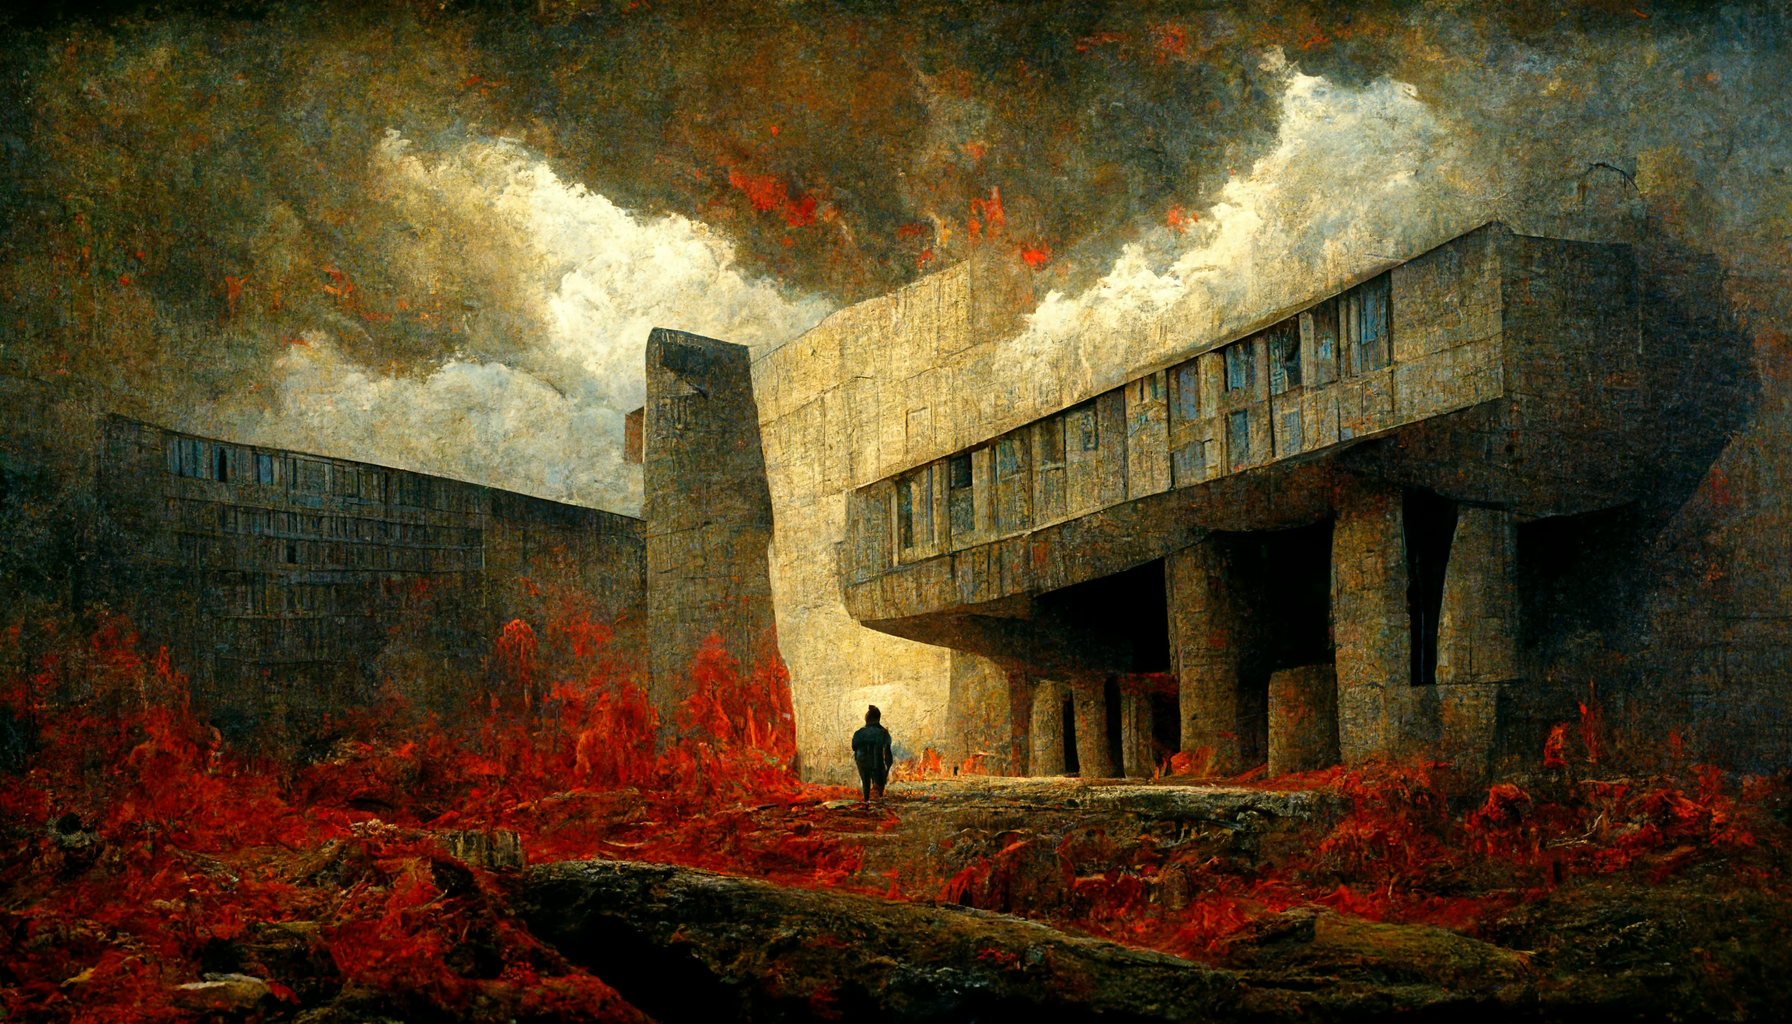 ZenithWombat_a_collection_of_brutalist_buildings_in_hell_realis_ce245b5f-e996-4b42-83eb-92089c79985a.png